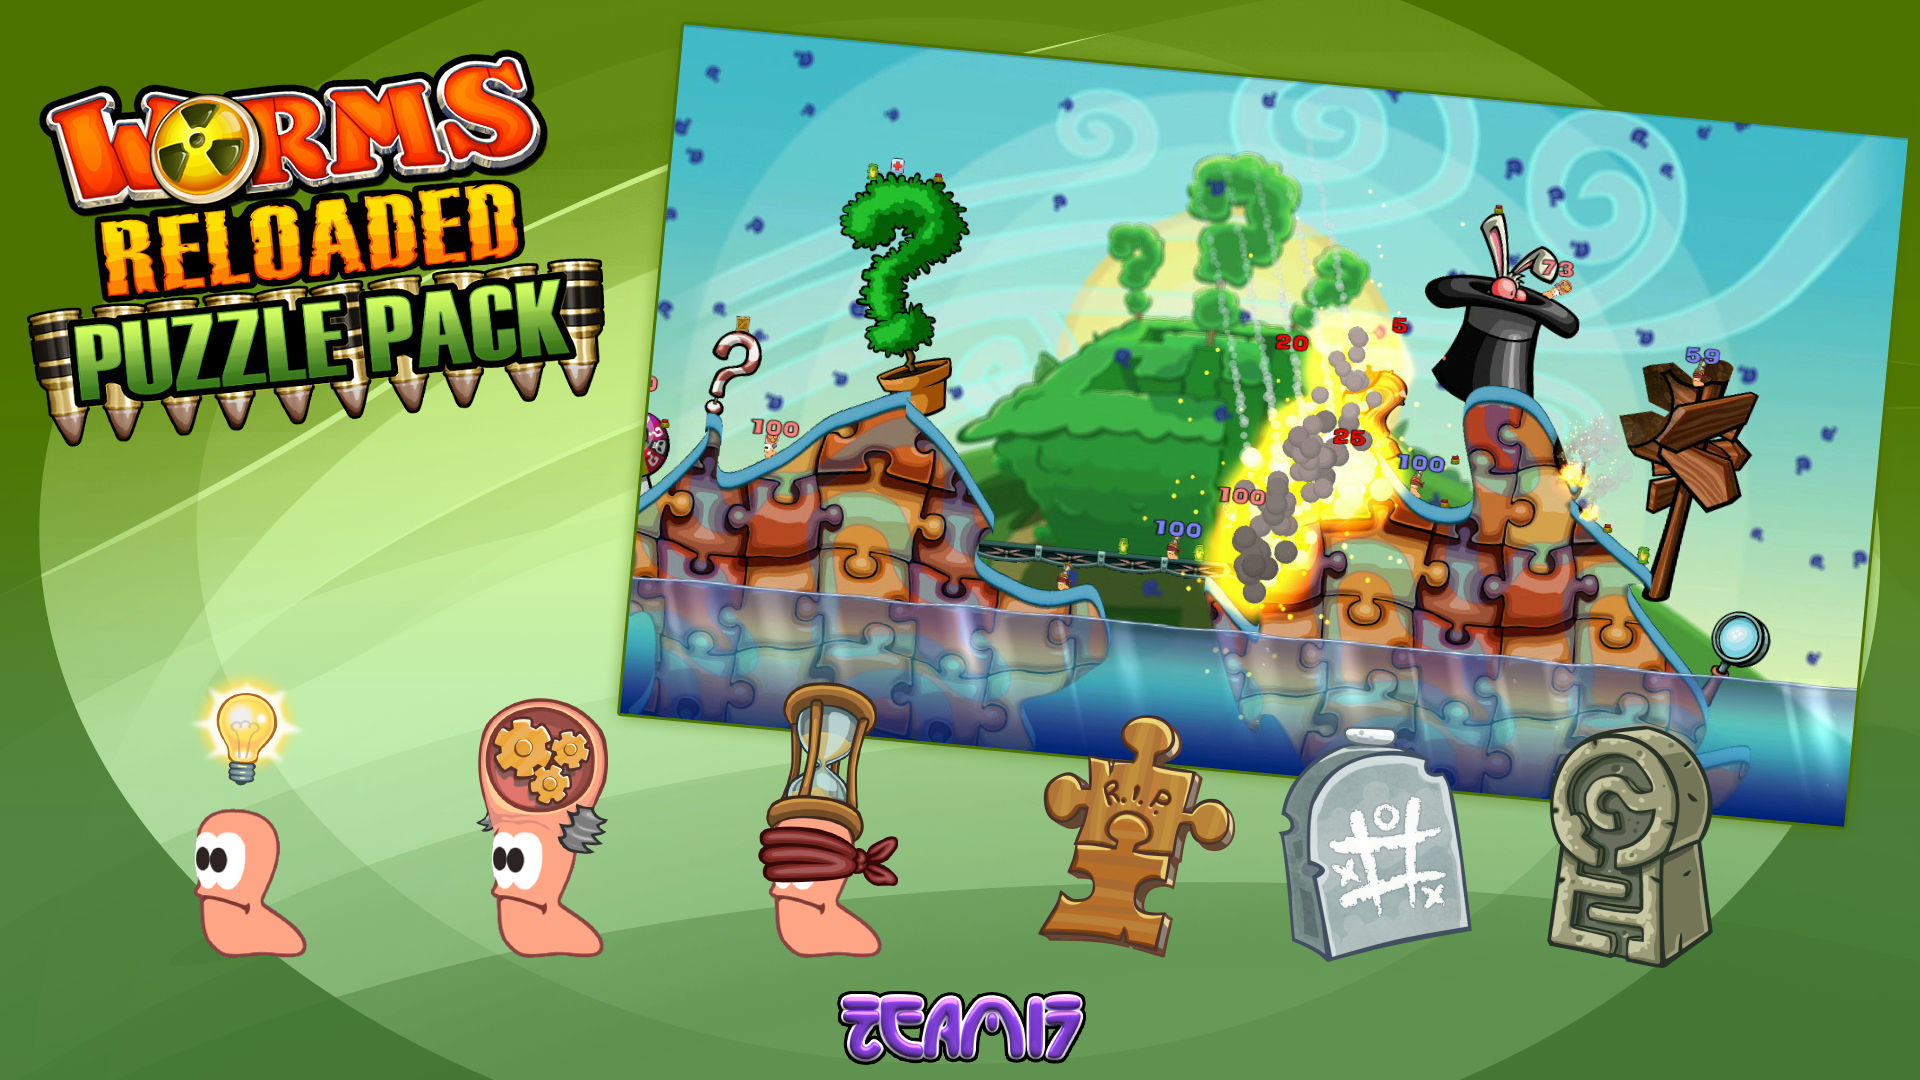 Worms Reloaded: Puzzle Pack Featured Screenshot #1